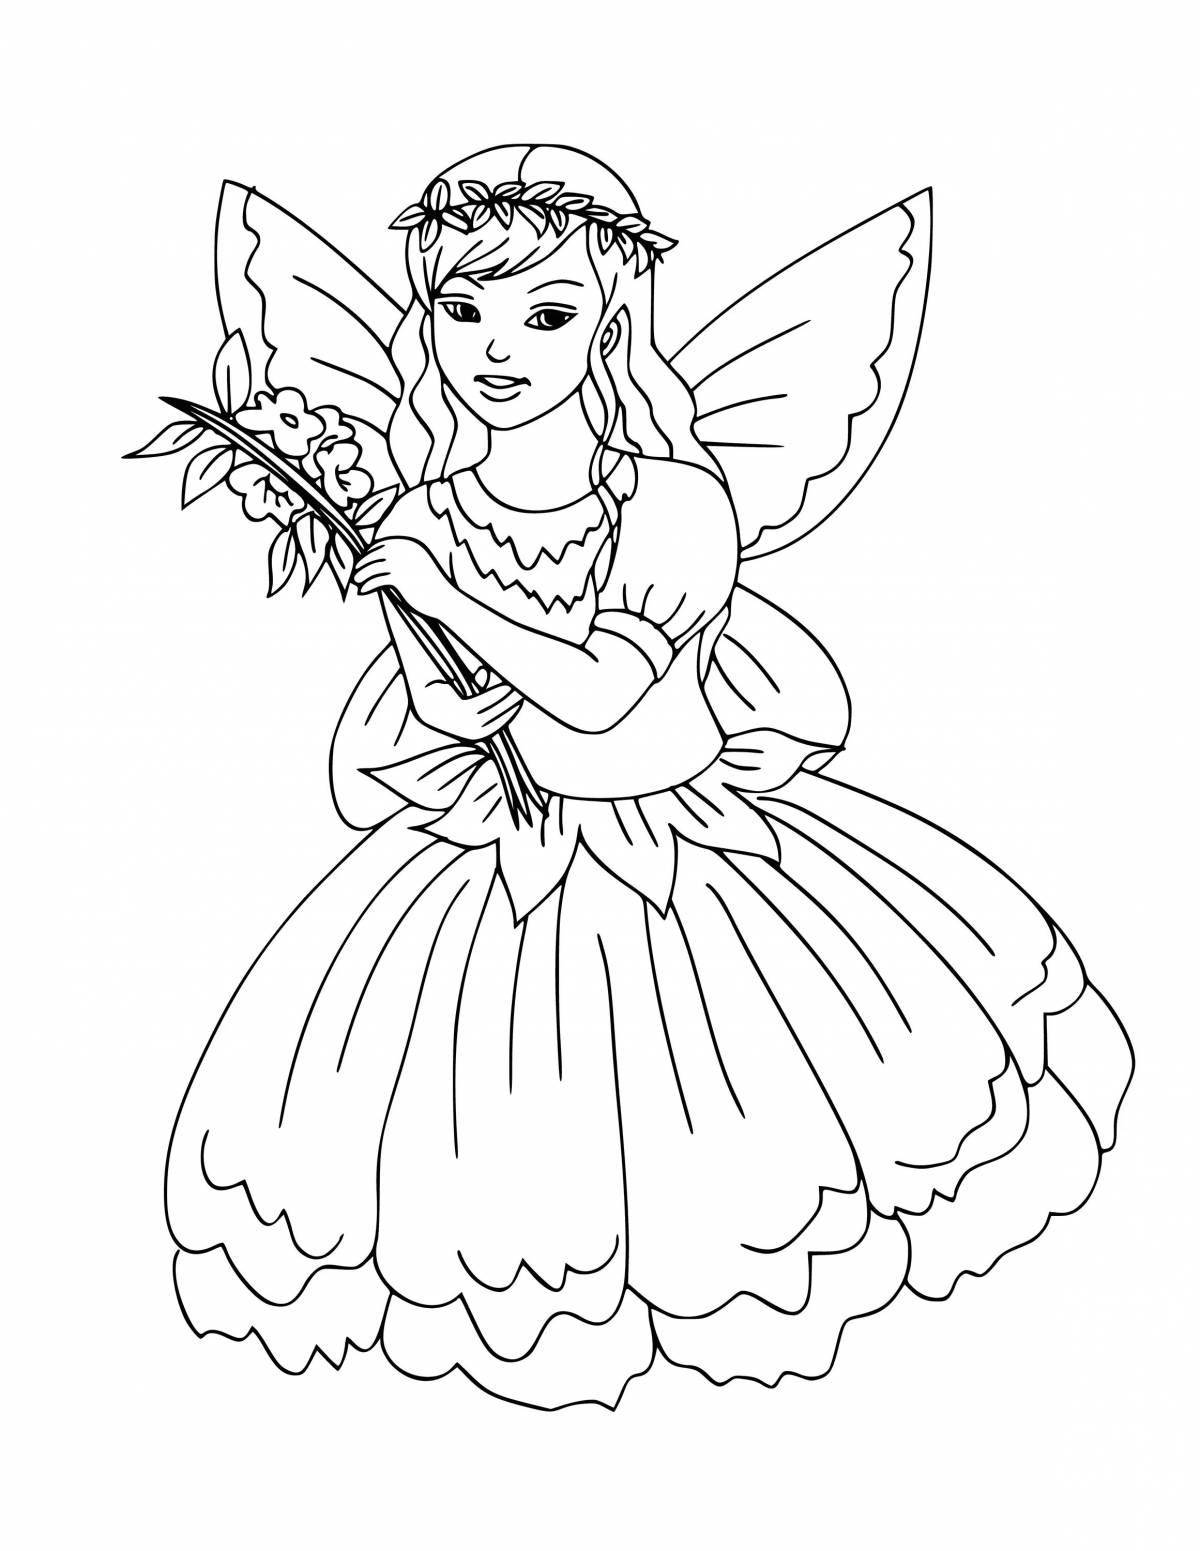 Coloring book sparkling little fairy